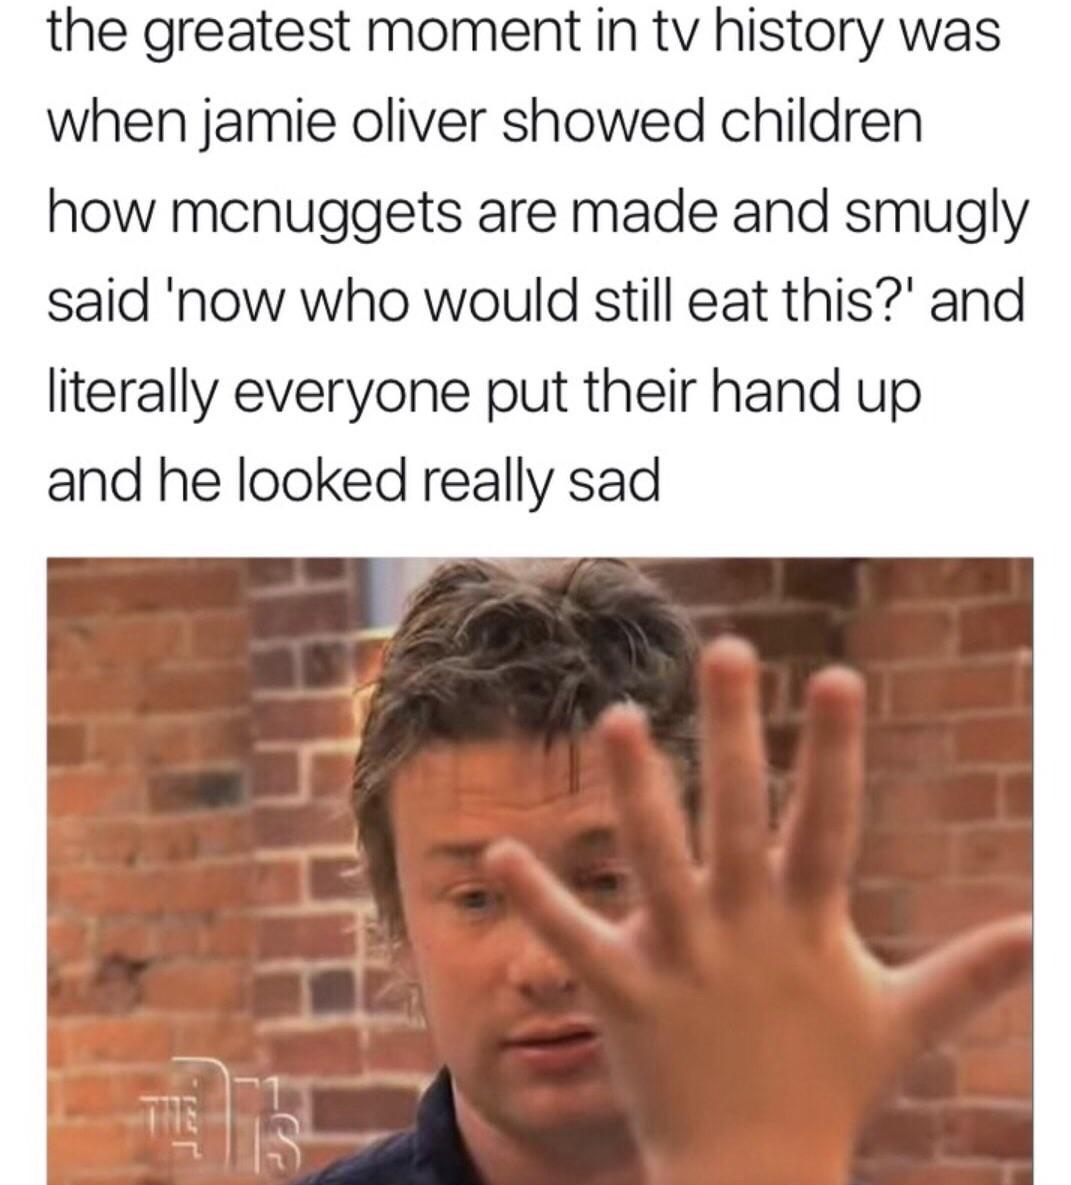 awesome randoms and funny memes - jamie oliver memes - the greatest moment in tv history was when jamie oliver showed children how mcnuggets are made and smugly said 'now who would still eat this?' and literally everyone put their hand up and he looked re